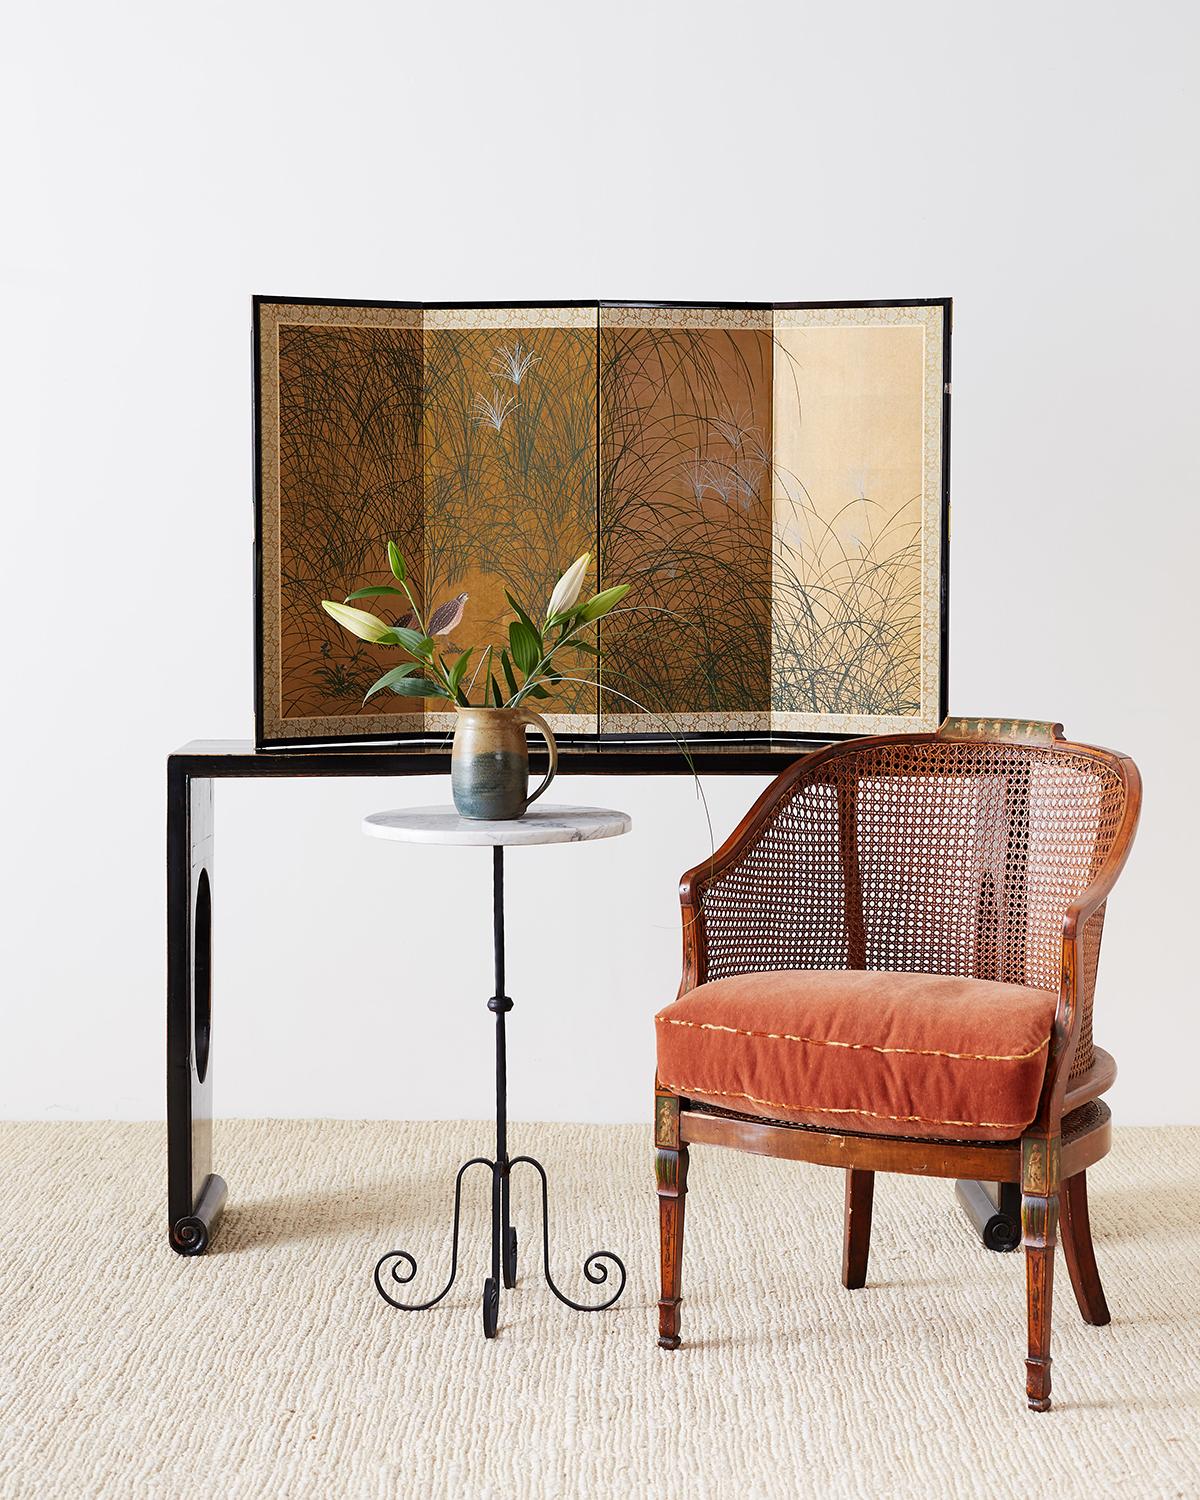 Charming Japanese four-panel byobu screen depicting two young quail in Eulalia grasses. Beautifully painted with fine grass and flowers over squares of gold leaf. The screen is set in an ebonized wood frame with a gold silk brocade border.